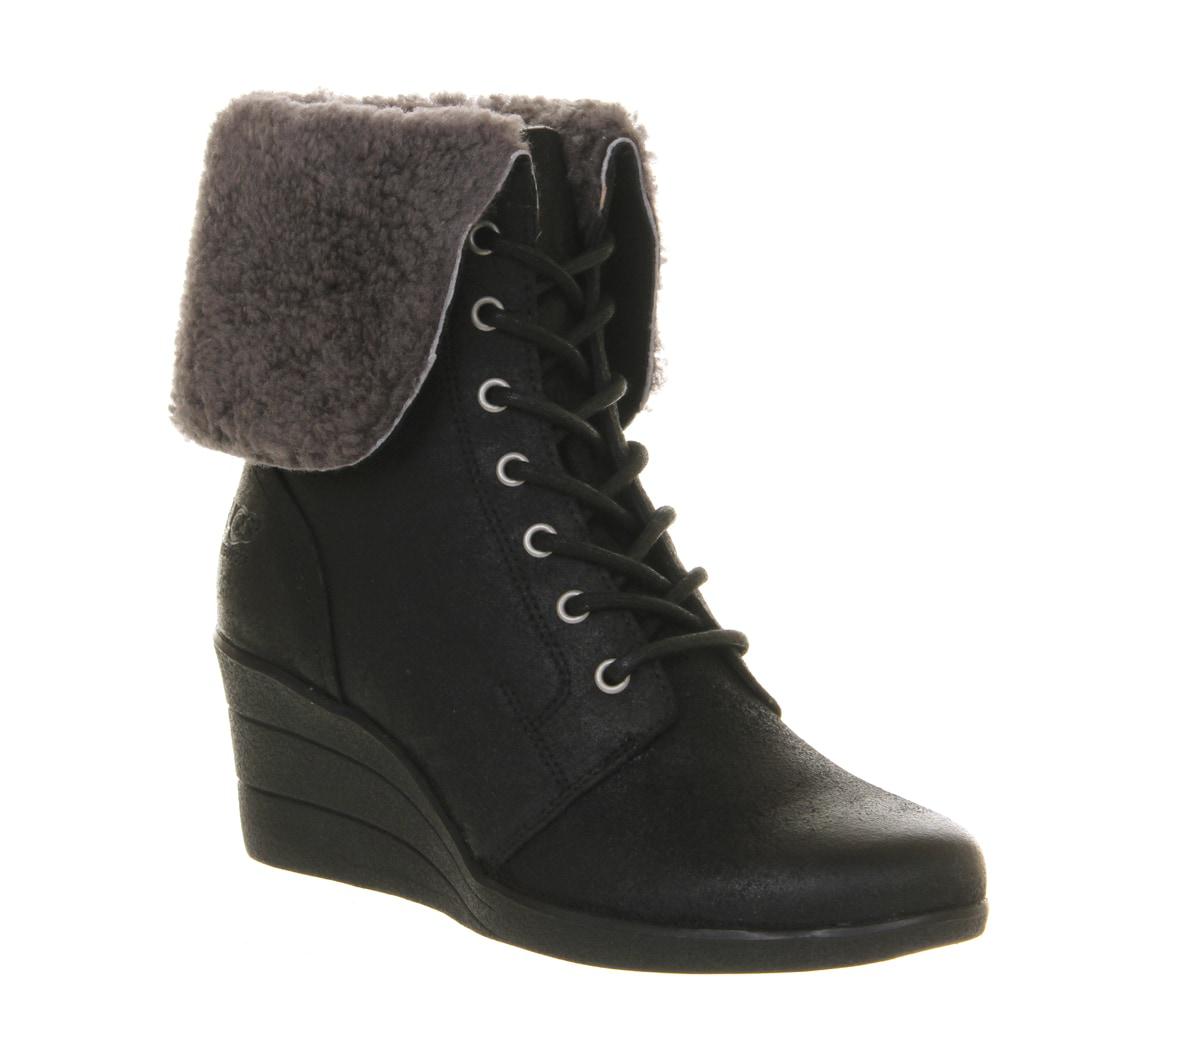 Lyst - Ugg Zea Shearling Wedge Lace Up Boots in Black